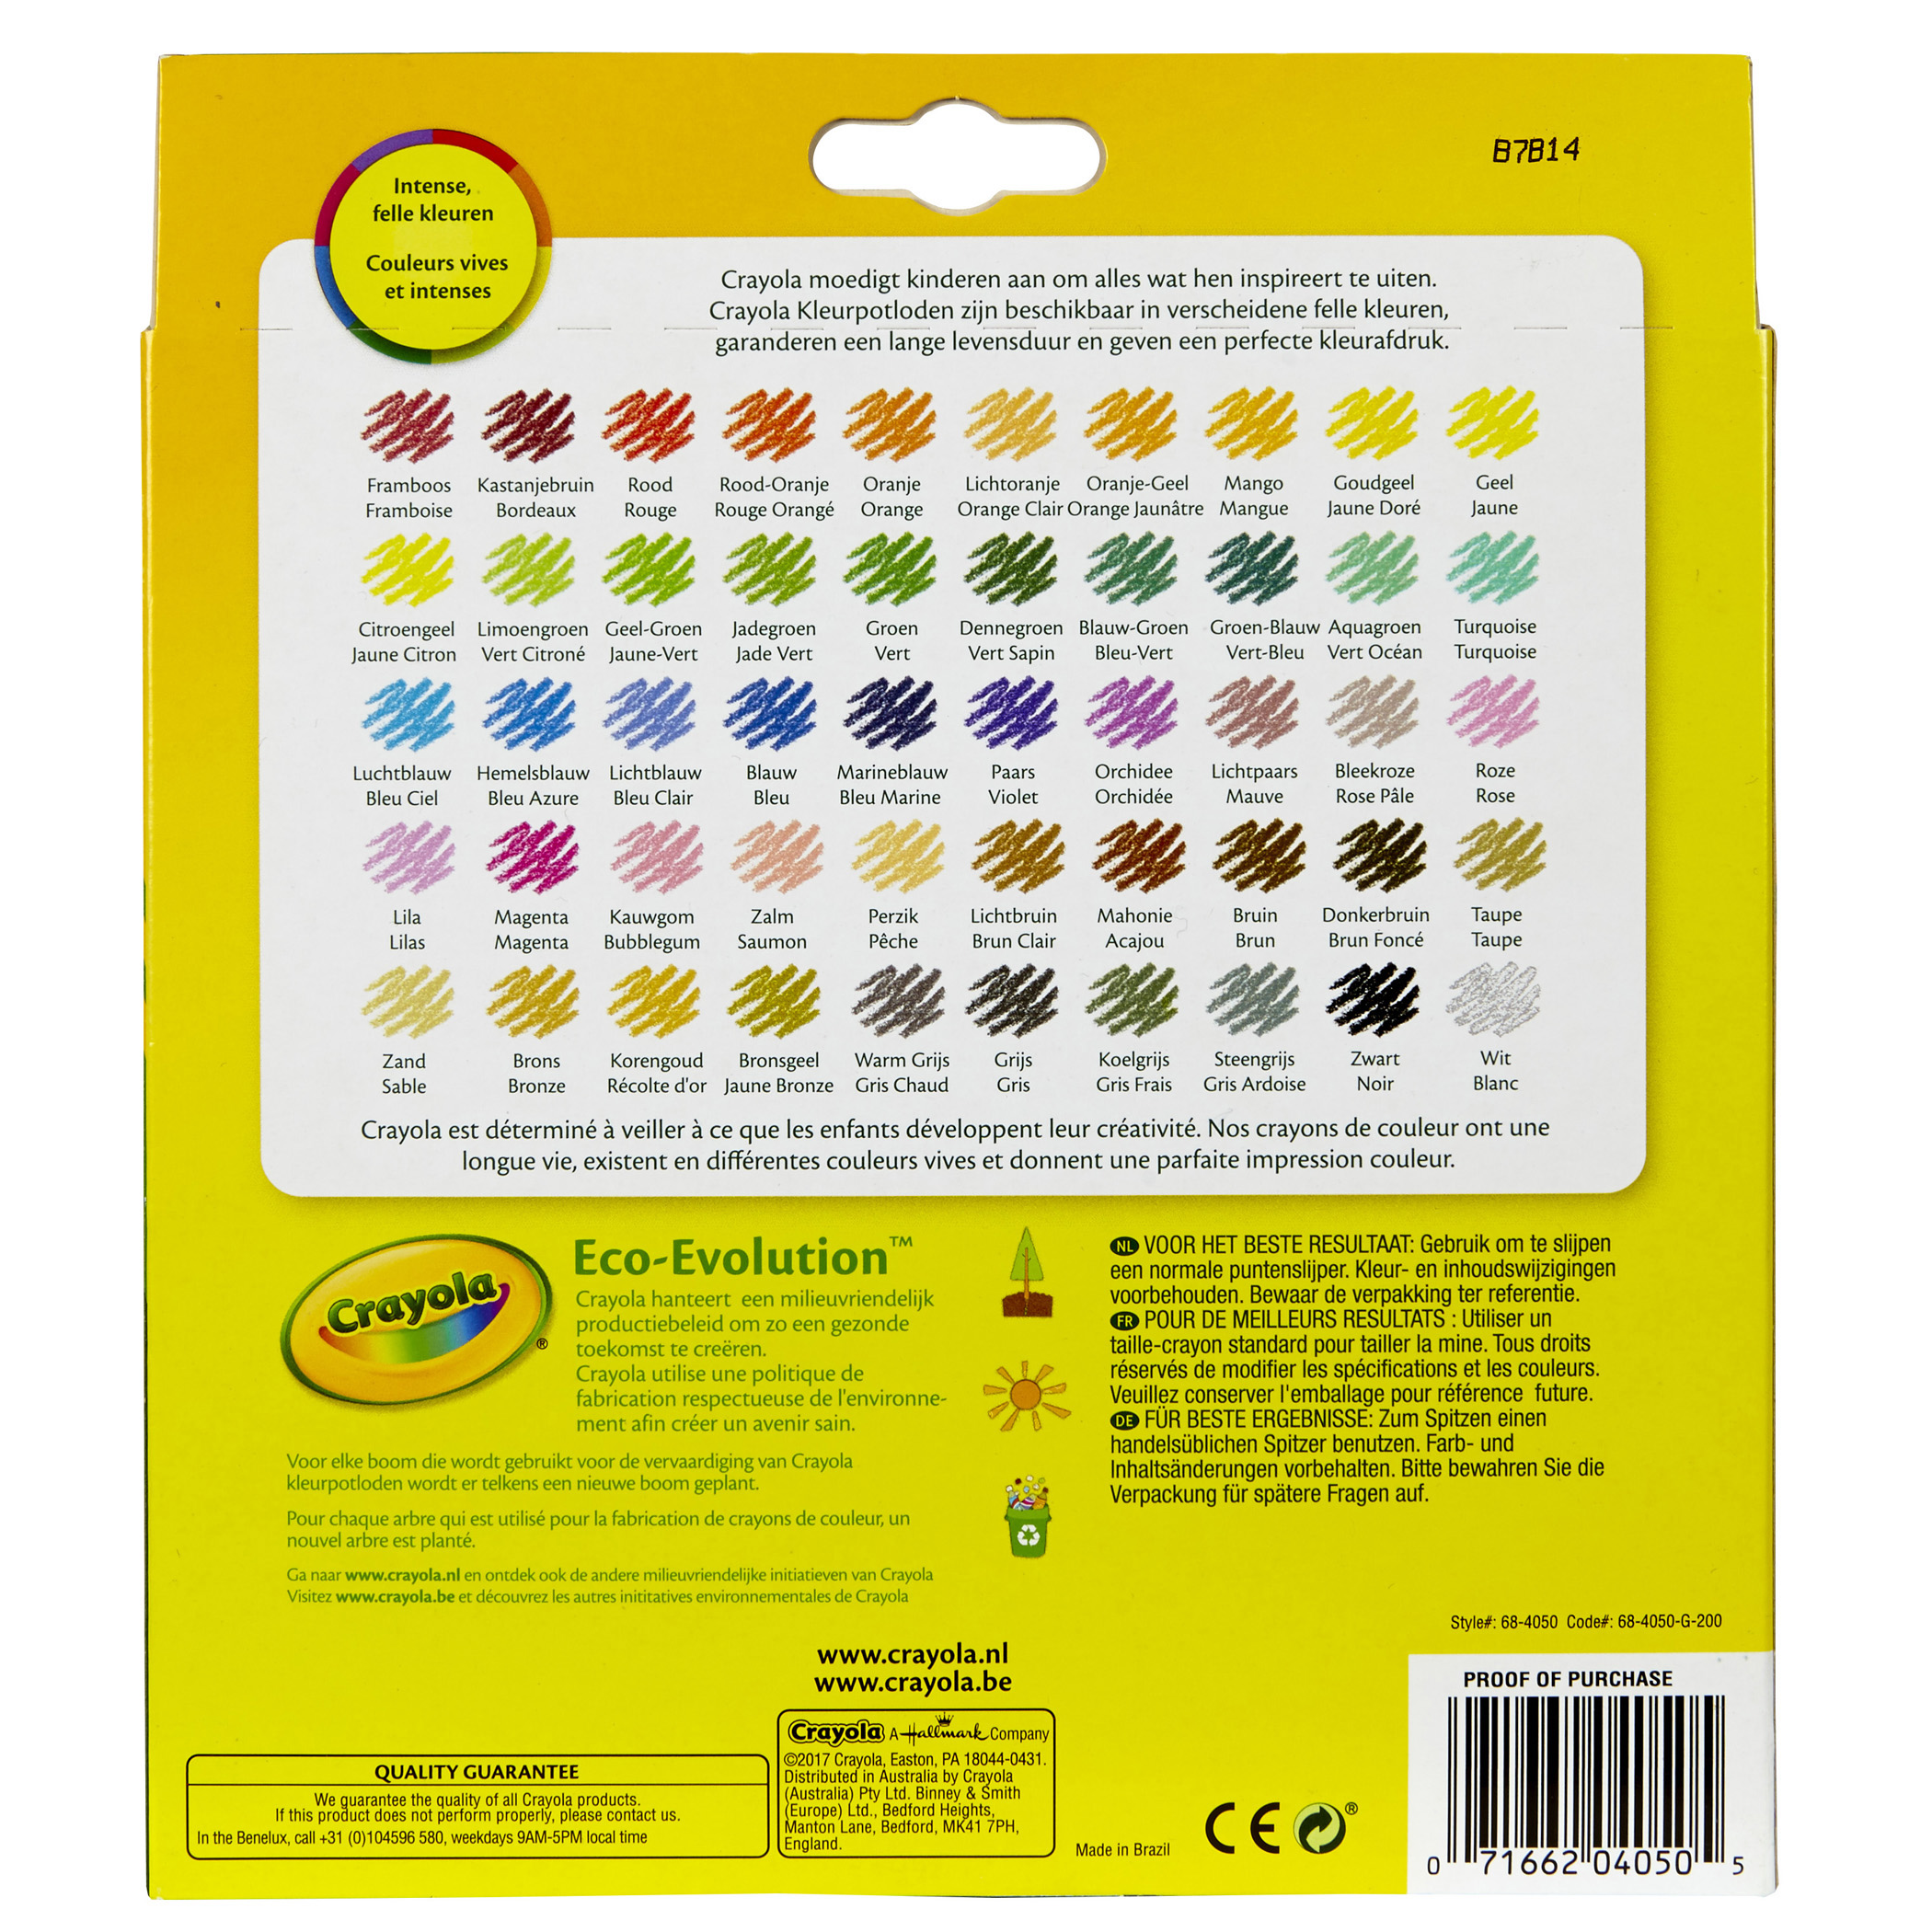 New Crayola Colored Pencils, 4 Count, Single Colors (Buy 5+ = Free  Shipping!)